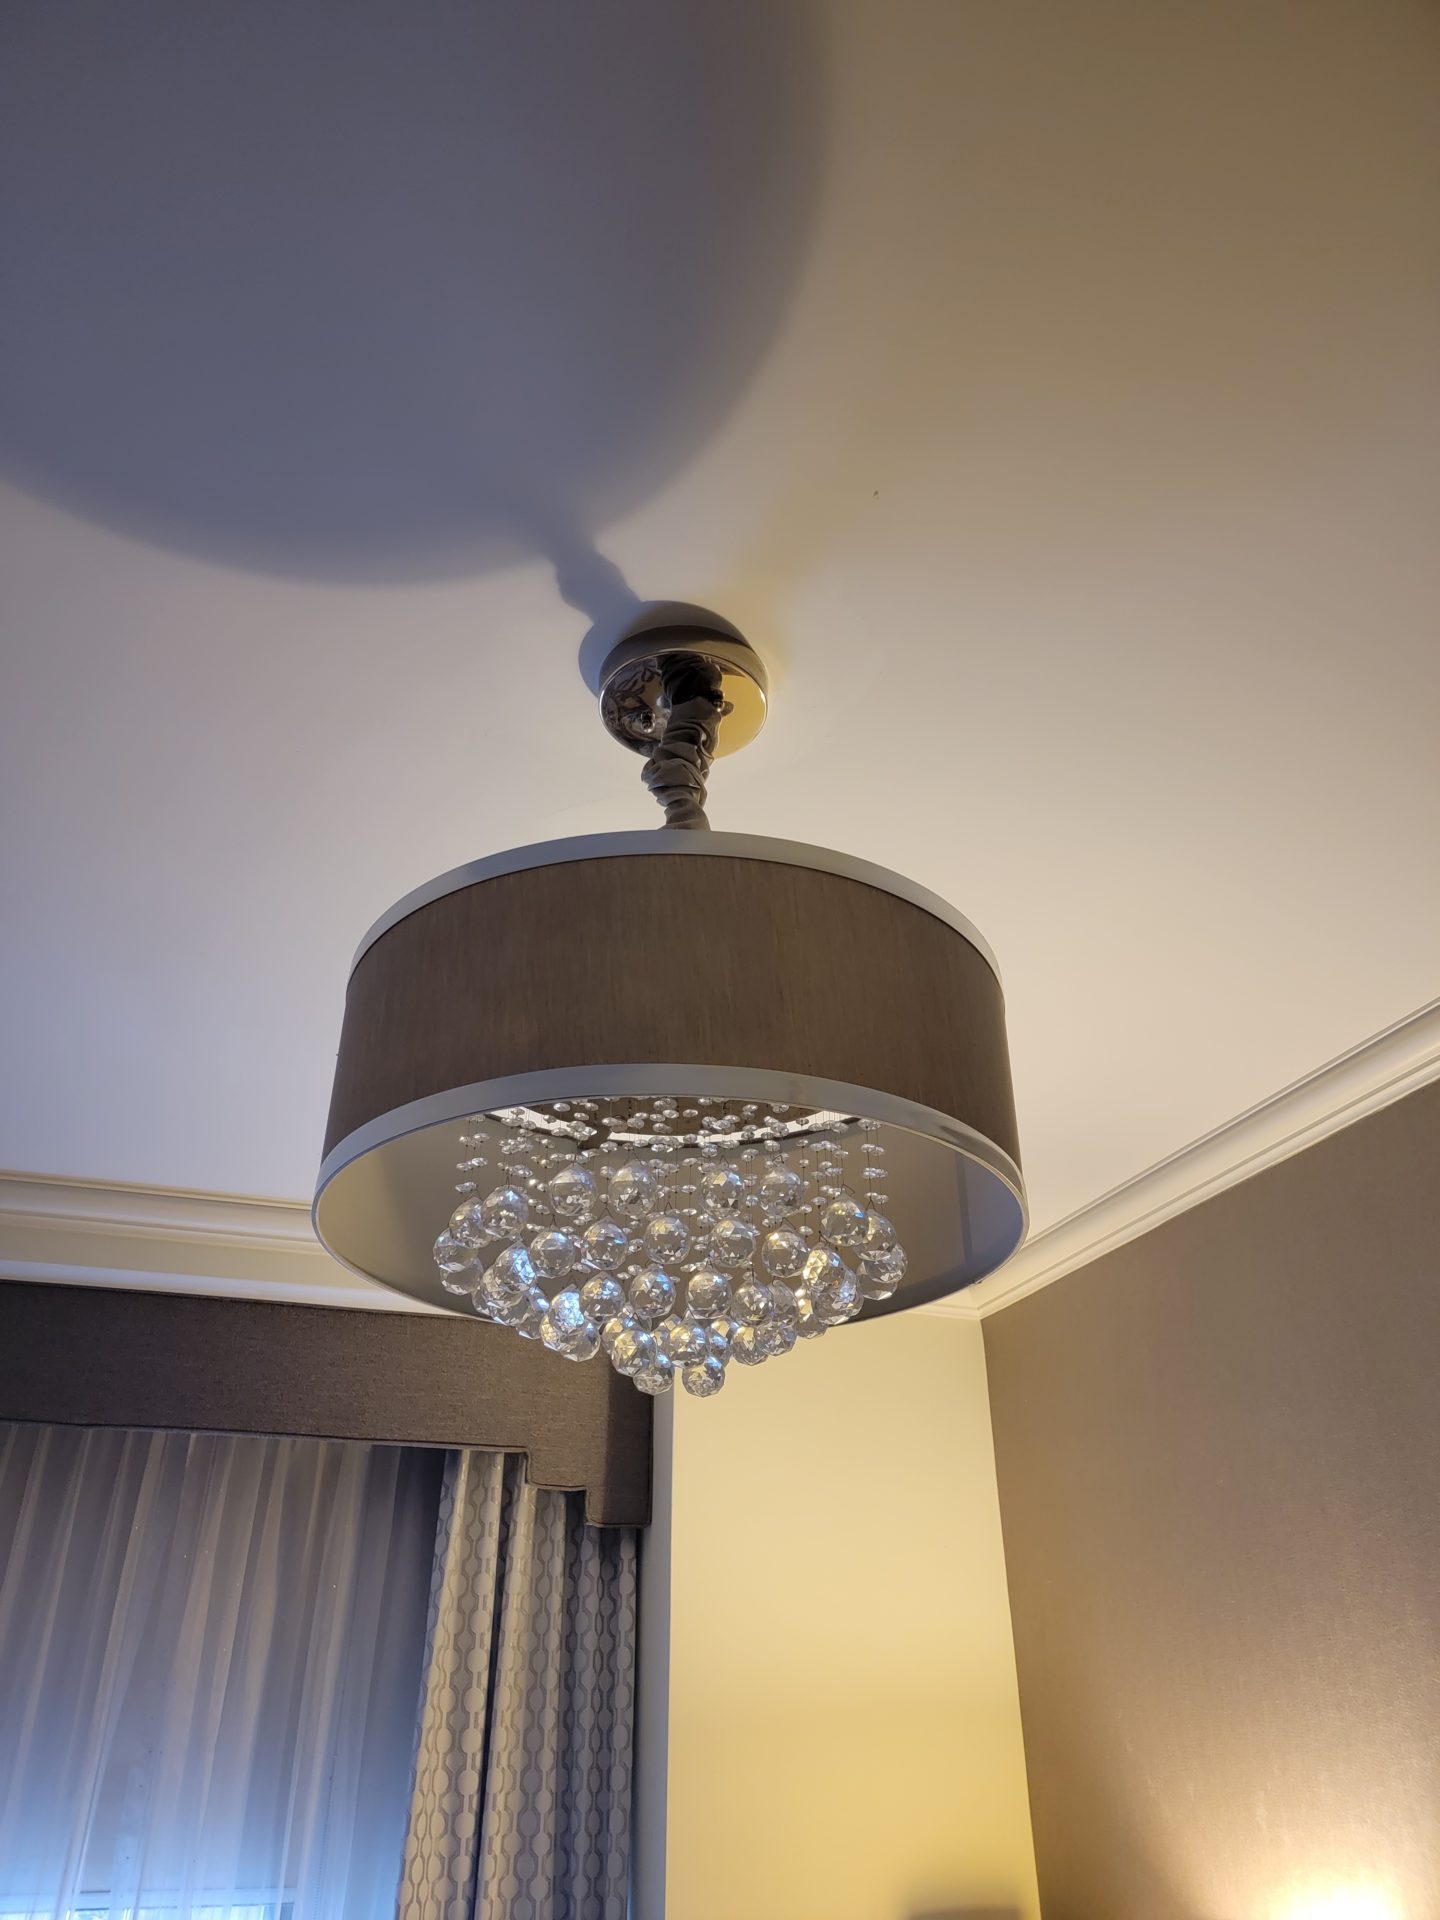 a chandelier with crystal balls from the ceiling